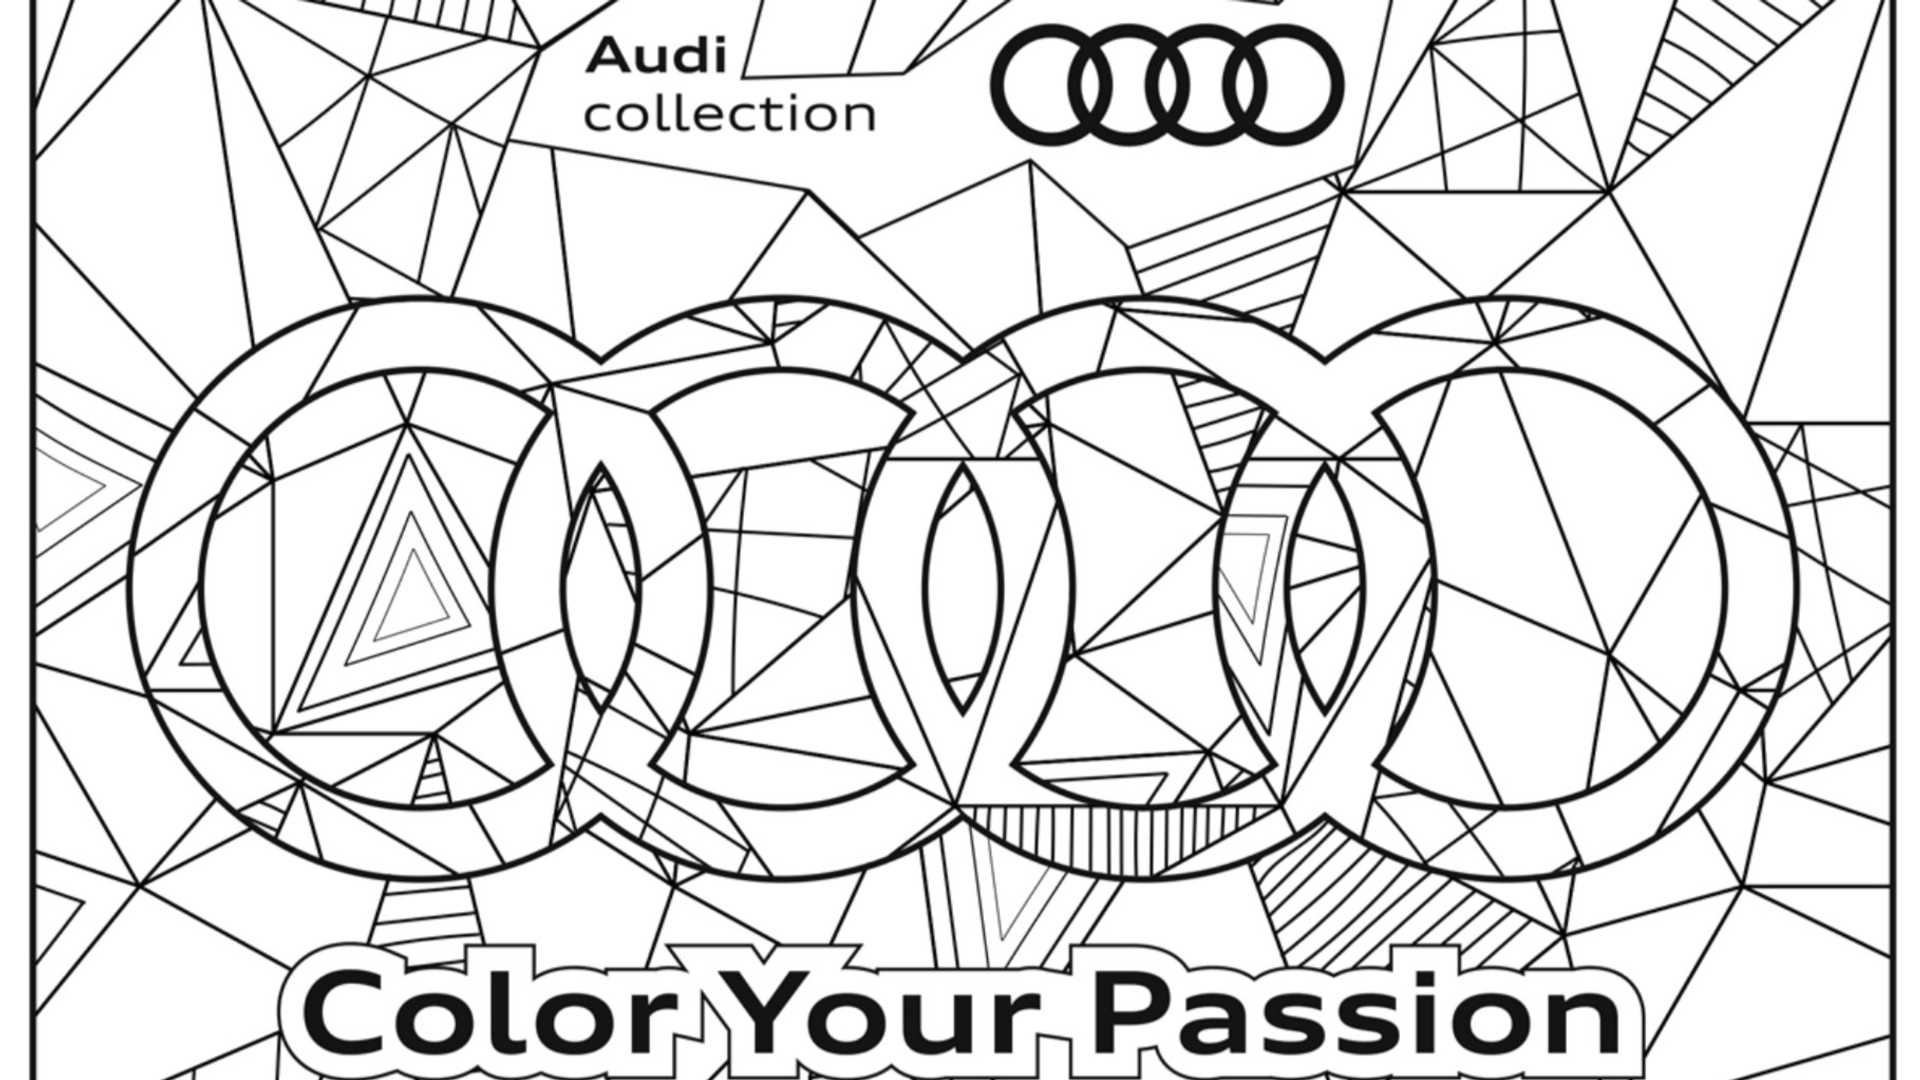 Here Are Car-Themed Coloring Pages To Keep You And The Kids Busy